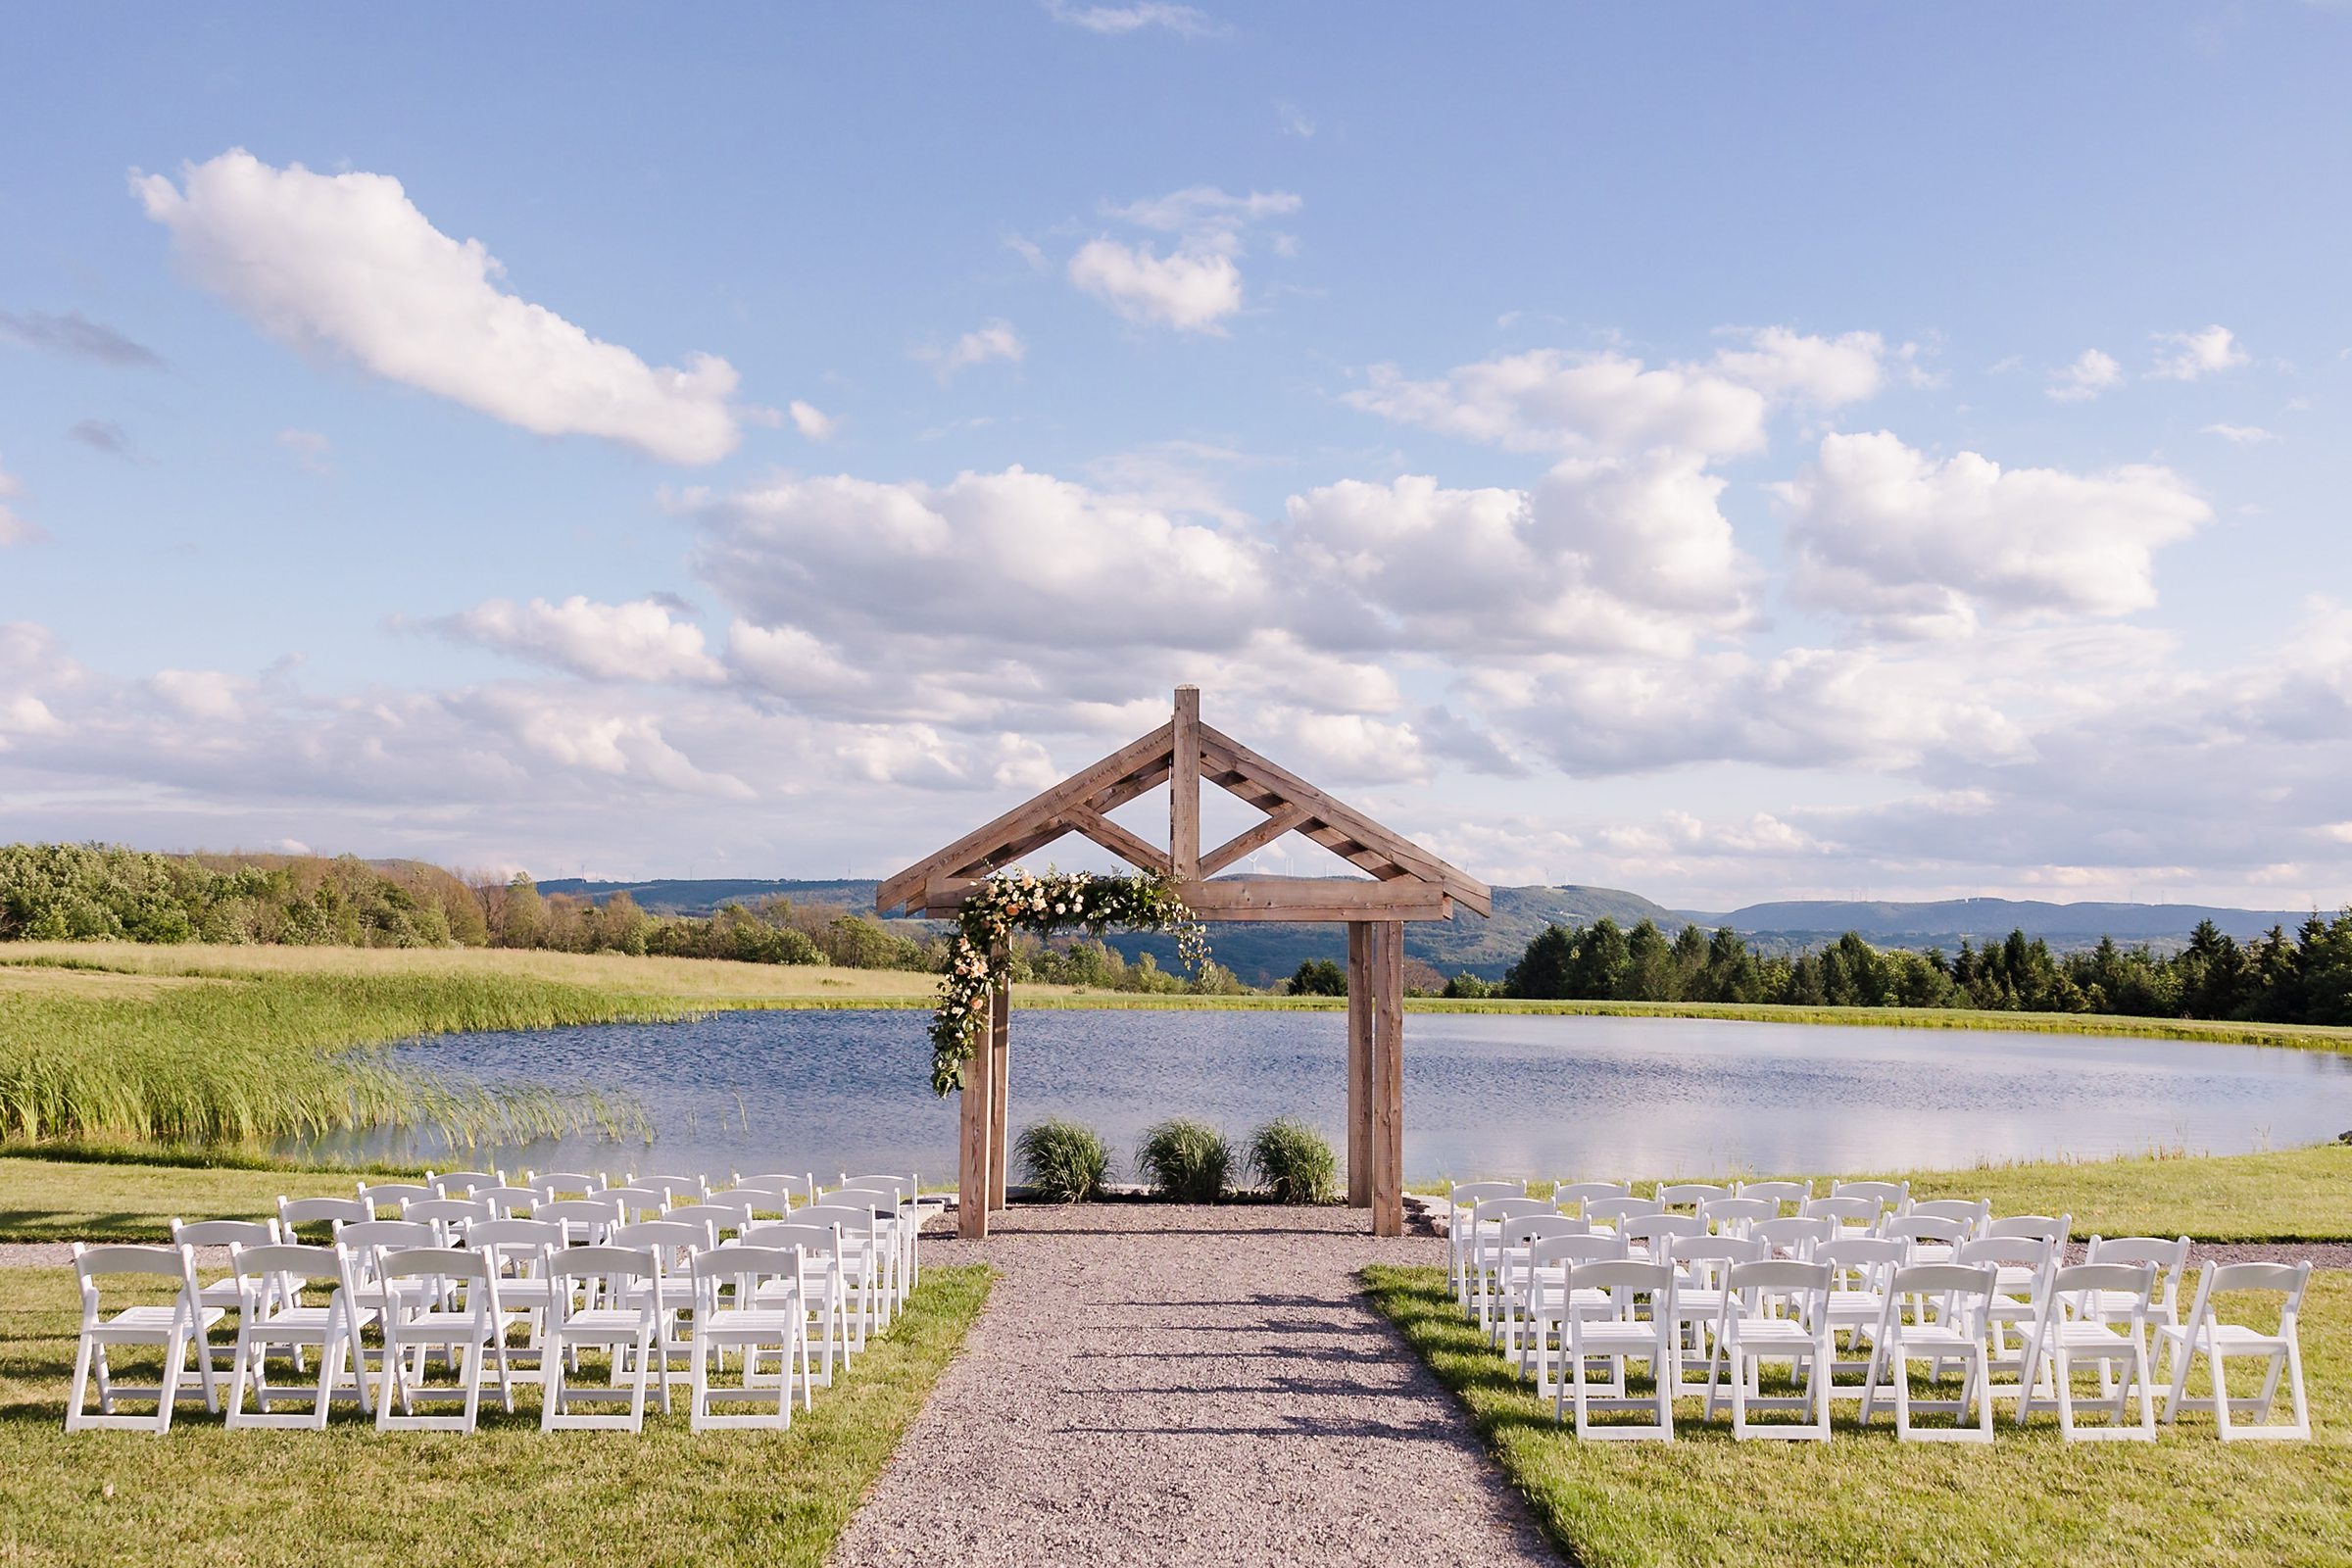 Outdoor ceremony setup at the Wren's Roost Barn Venue in Naples, New York.